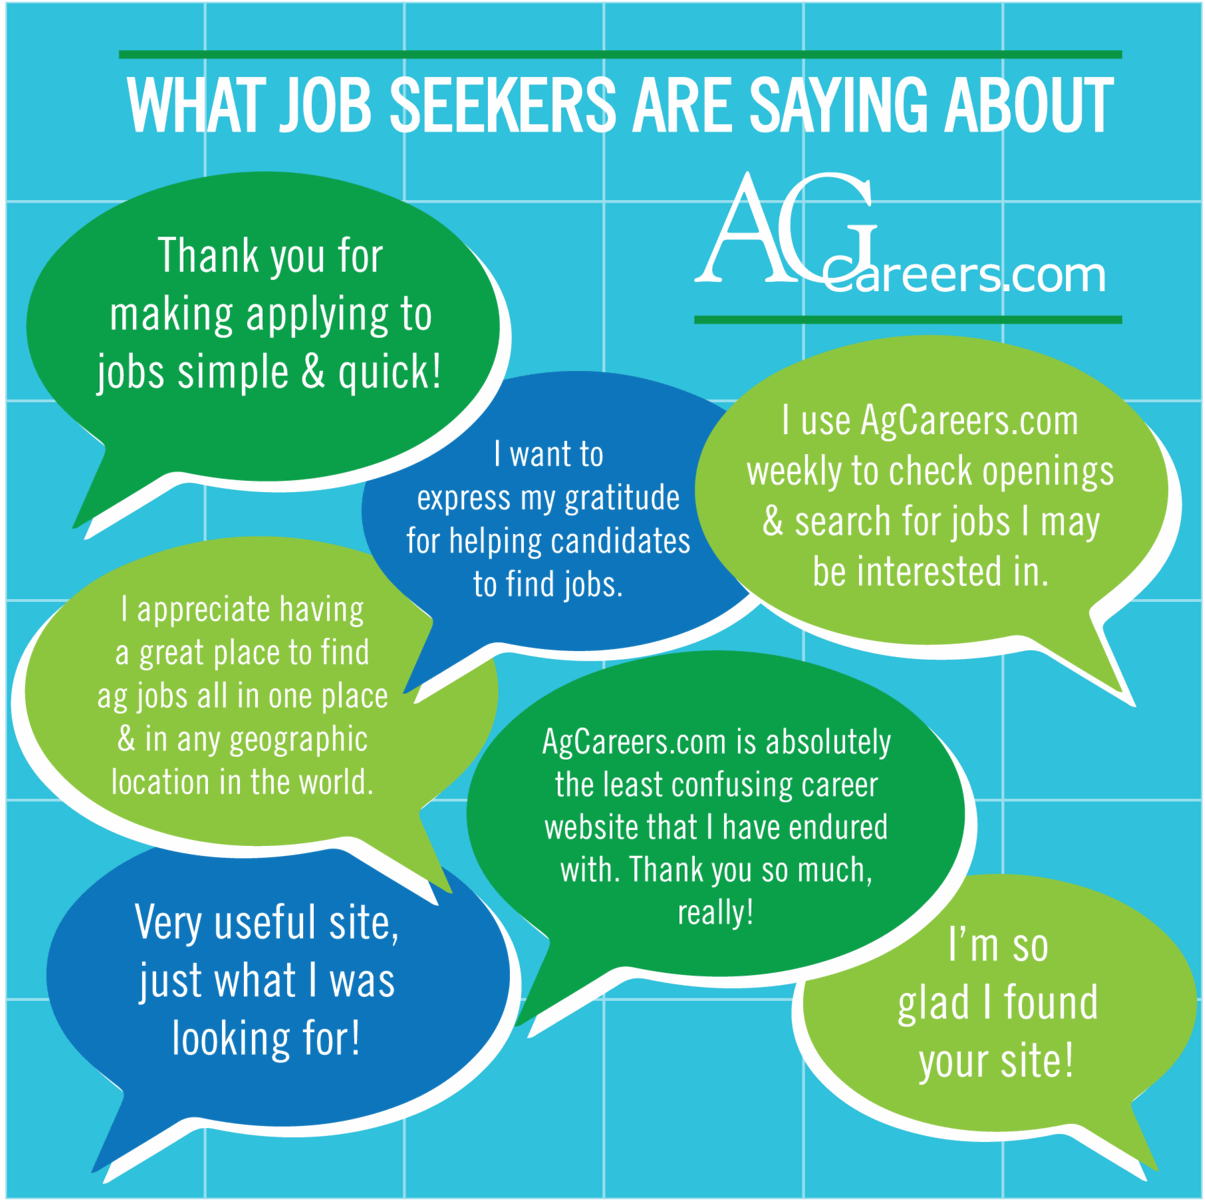 Infographic- Title: What Job Seekers are saying about AgCareers.com.  Image Text: Thank you for making applying to jobs simple & quick!  I want to express my gratitude for helping candidates to find jobs.  I use AgCareers.com weekly to check openings & search for jobs I may be interested in.  I appreciate having a great place to find ag jobs all in one place & in any geographic location in the world.  AgCareers.com is absolutely the least confusing career website that I have endured with.  Thank you so much, really!  Very useful site, just what I was looking for!  I’m so glad I found your site!    